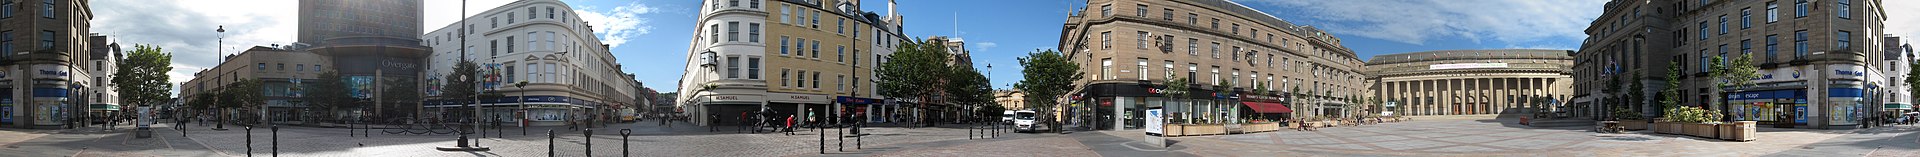 Dundee Old Town